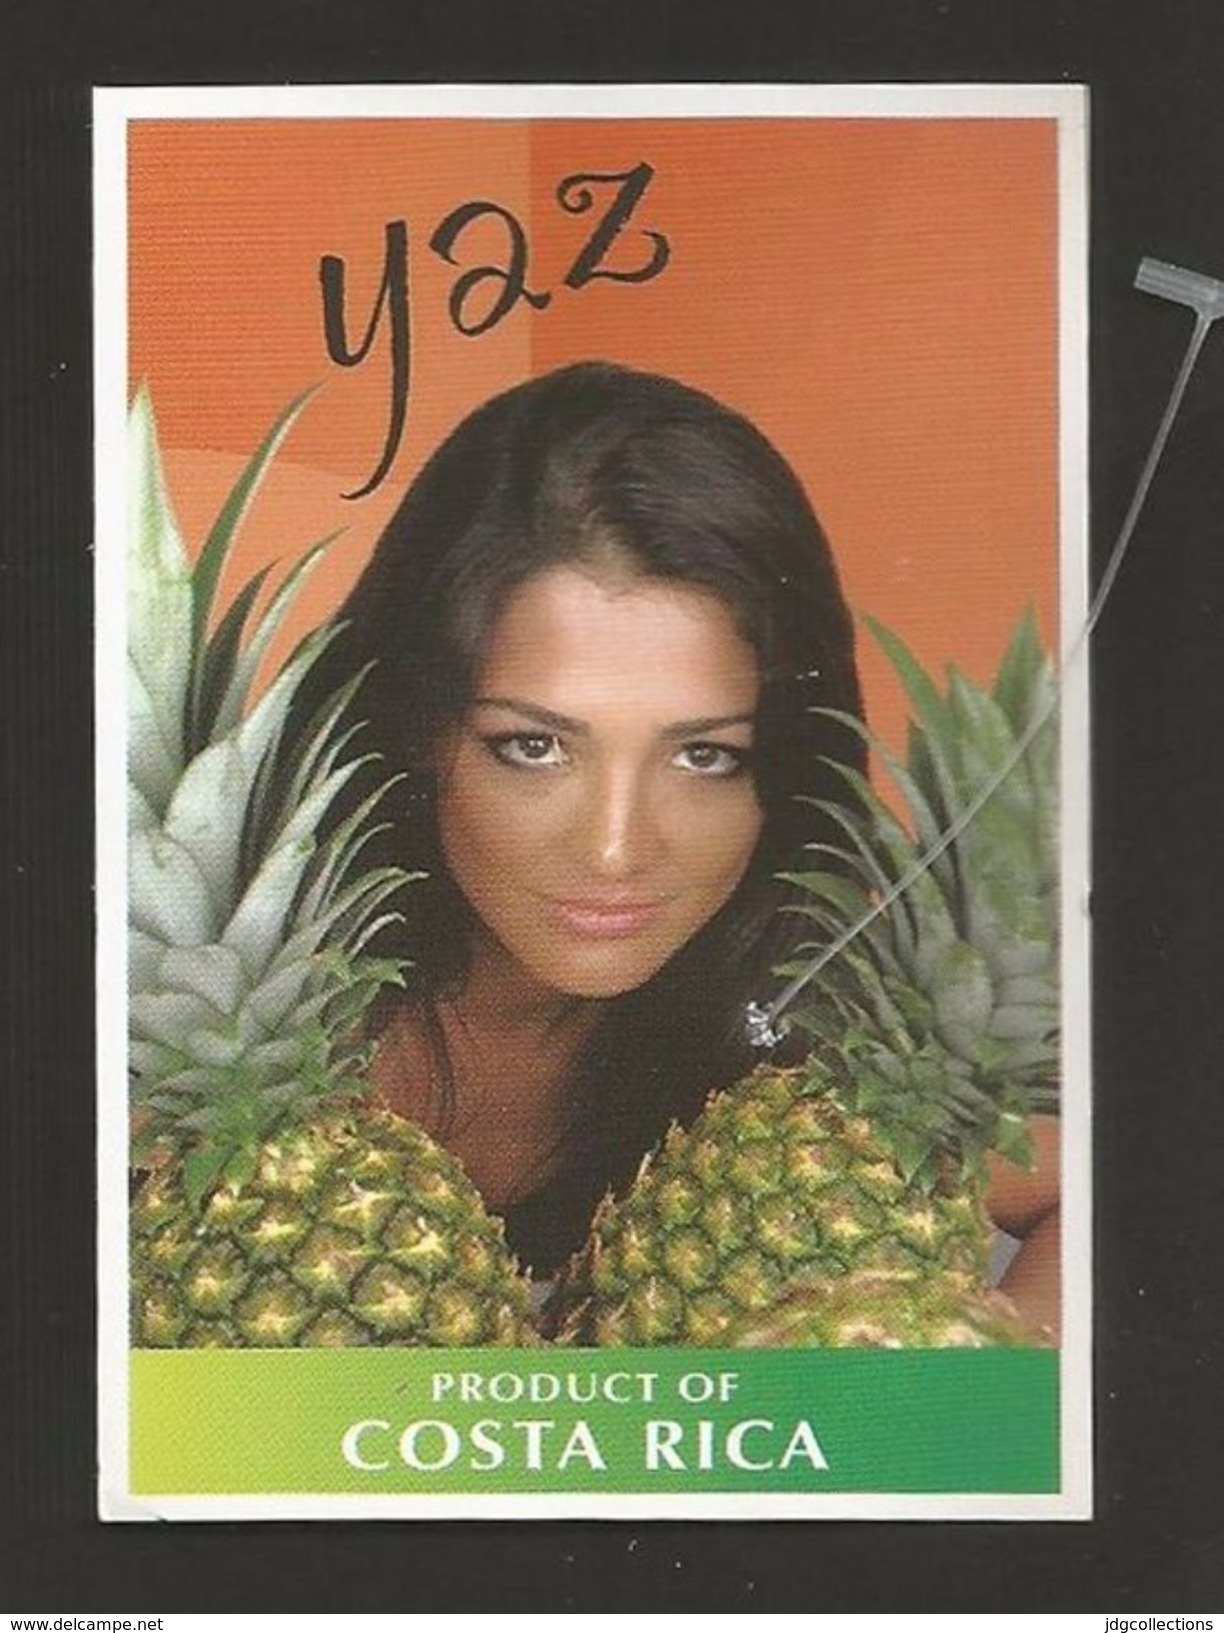 # PINEAPPLE YAZ Type 3 WITHOUT SIZE Fruit Tag Balise Etiqueta Anhanger Ananas Pina Costa Rica - Fruits & Vegetables